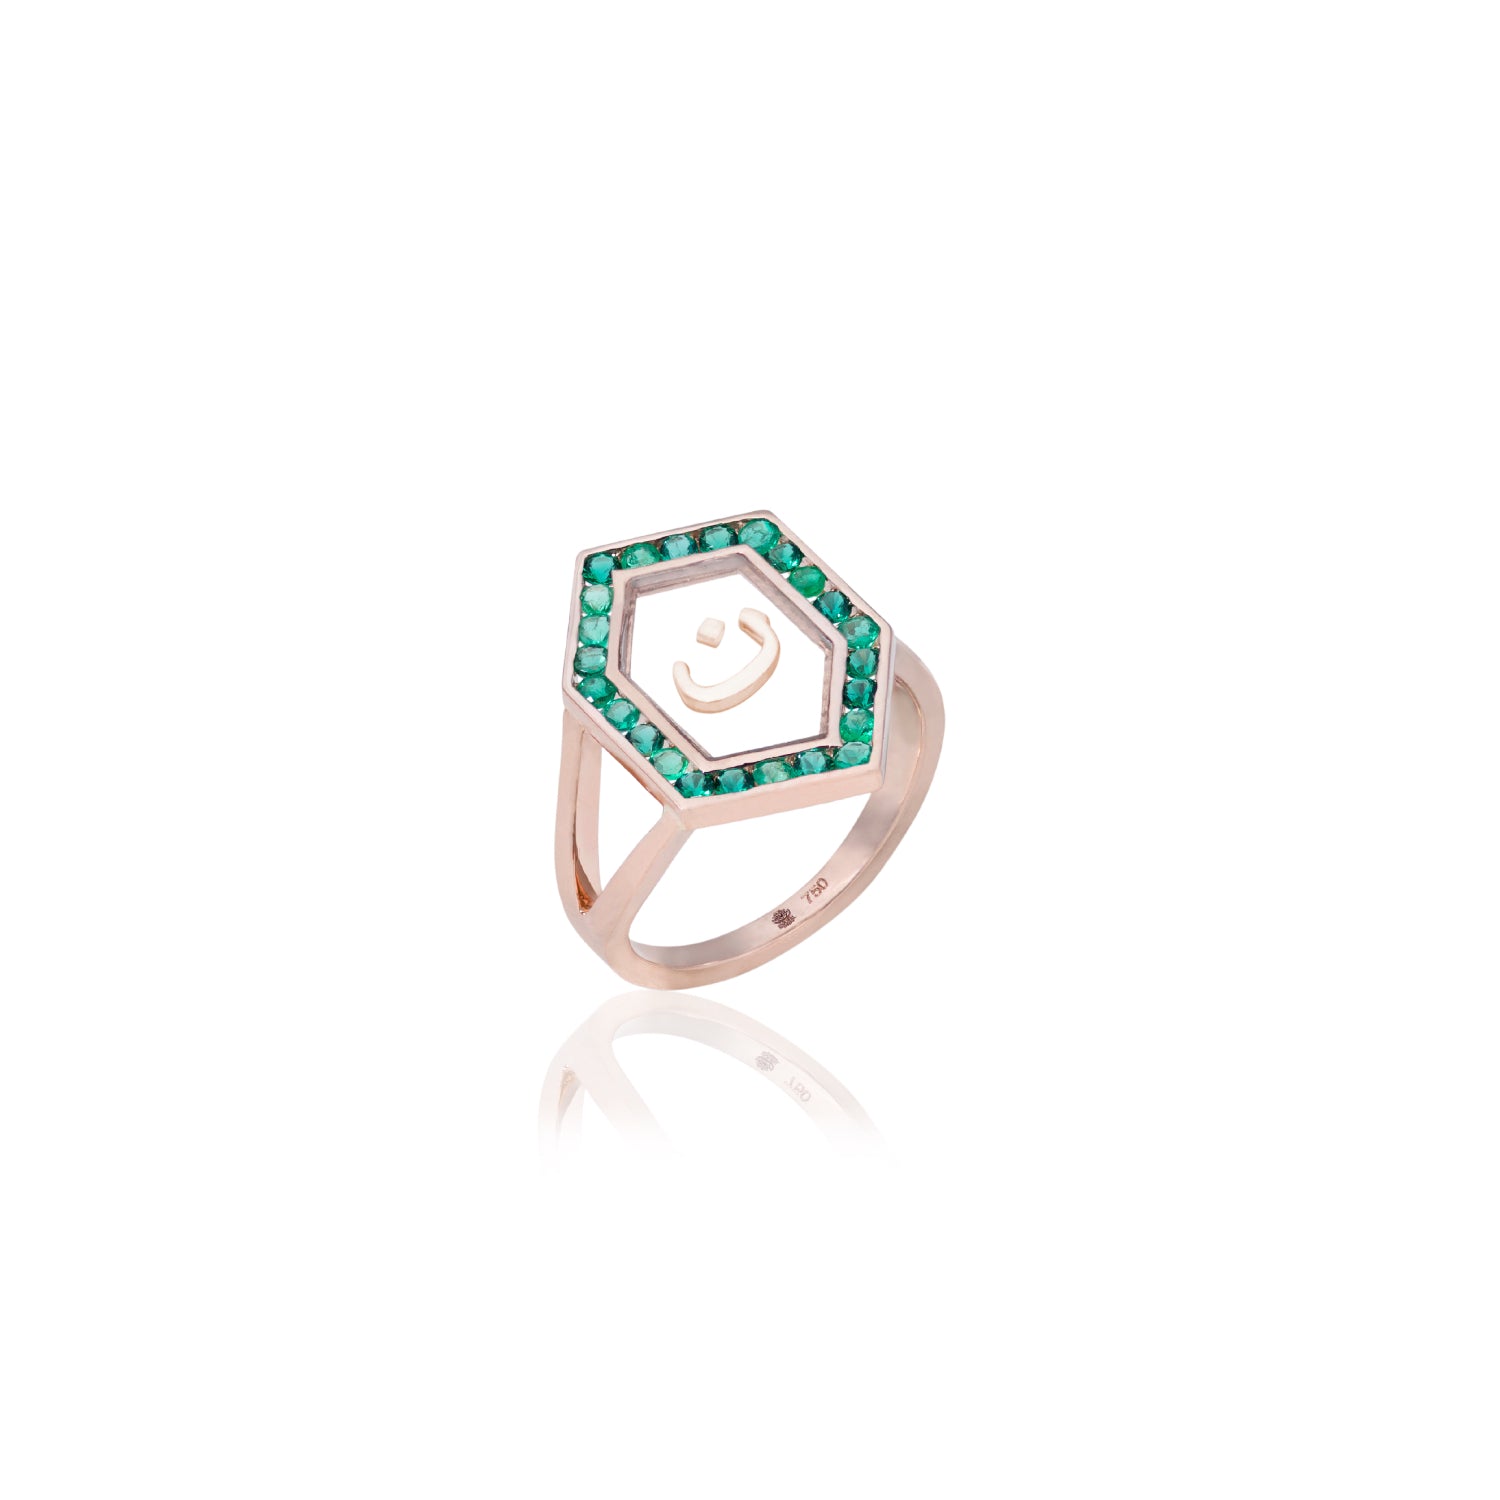 Qamoos 1.0 Letter ن Emerald Ring in Rose Gold